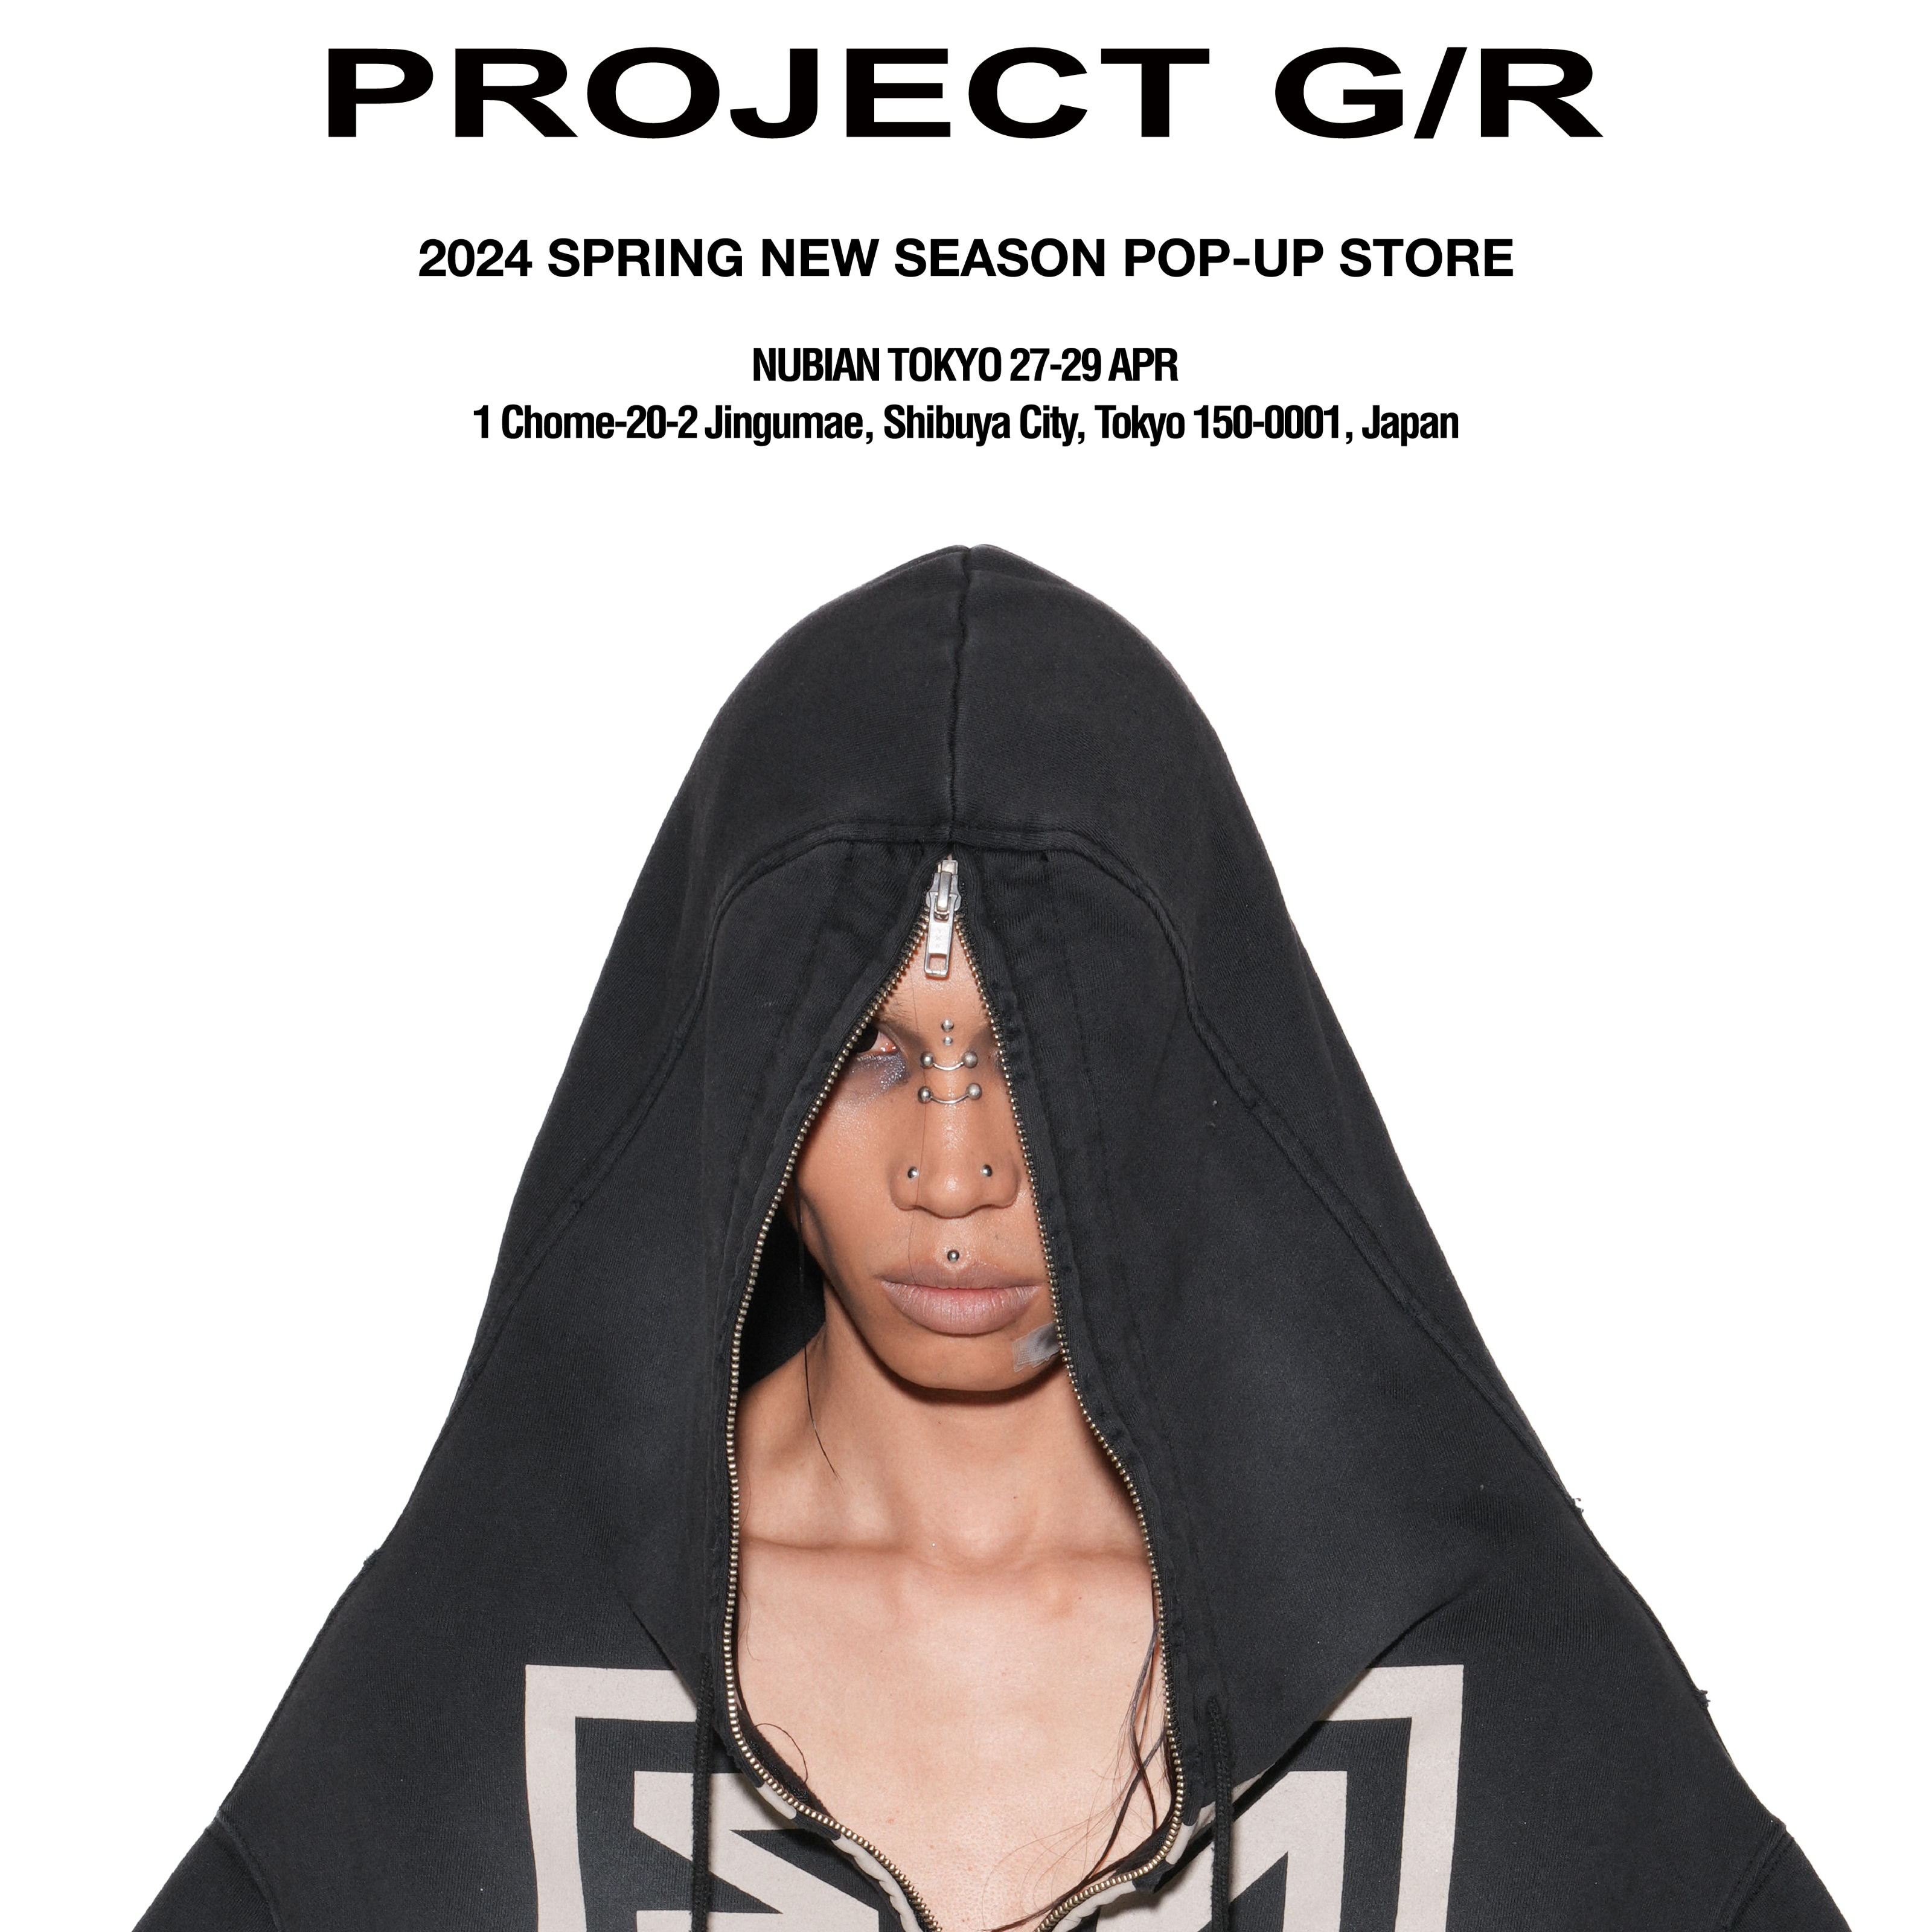 PROJECT G/R 2024 SPRING POP UP STORE